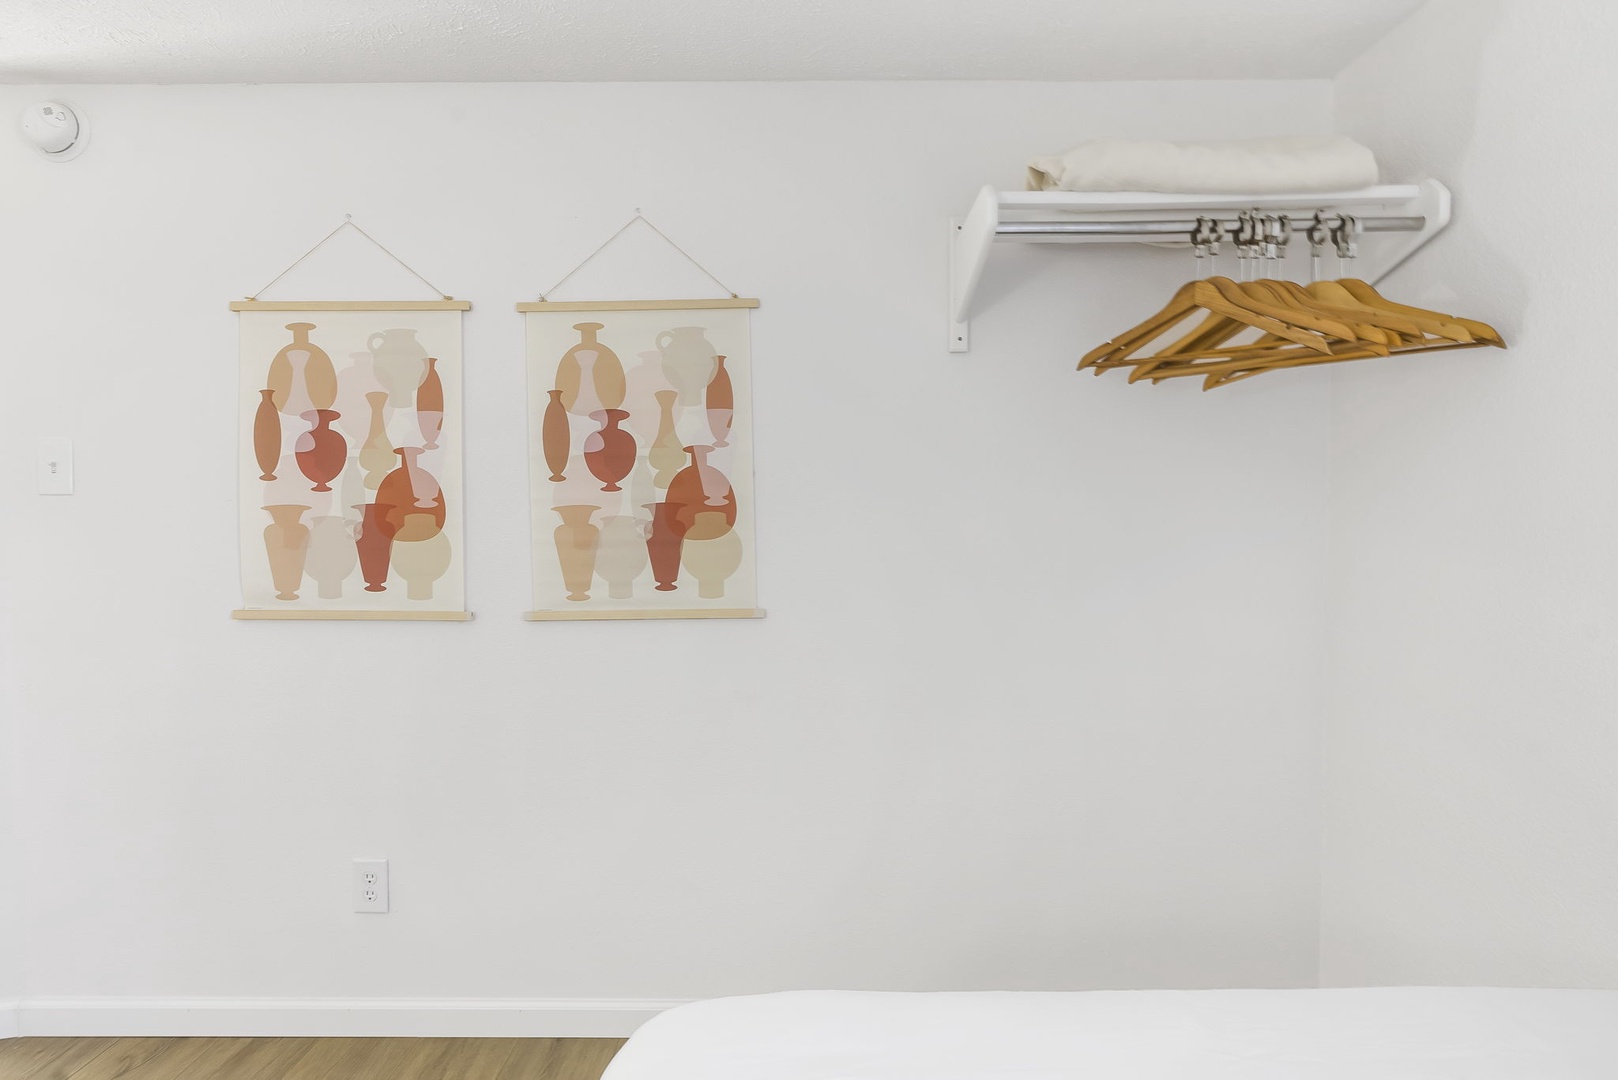 This 1st floor bedroom includes a pair of cozy full-sized beds